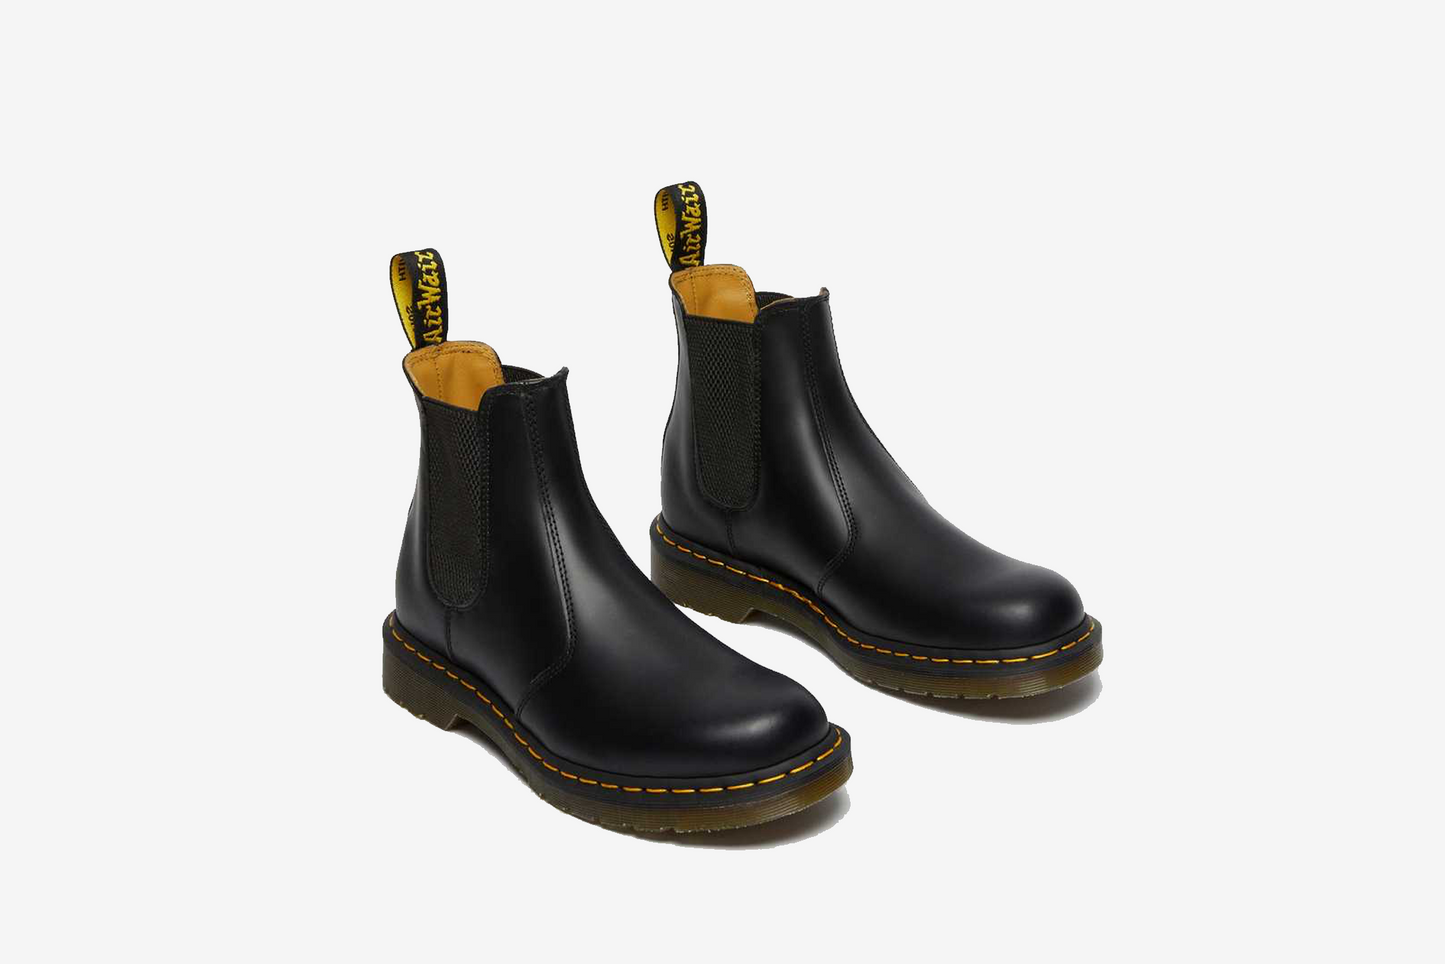 Dr. Martens "2976 Yellow Stitch Smooth Leather Chelsea Boot" M - Black